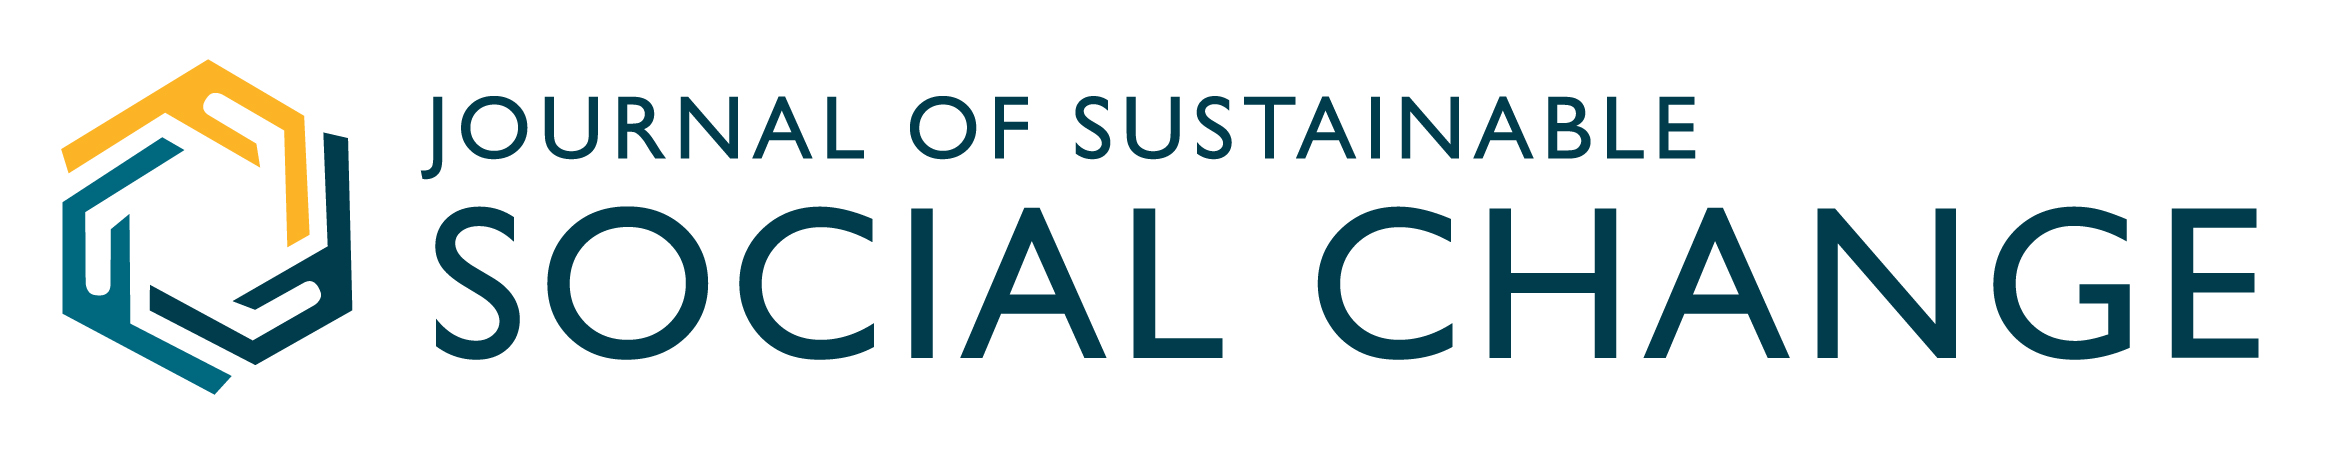 Journal of Sustainable Social Change